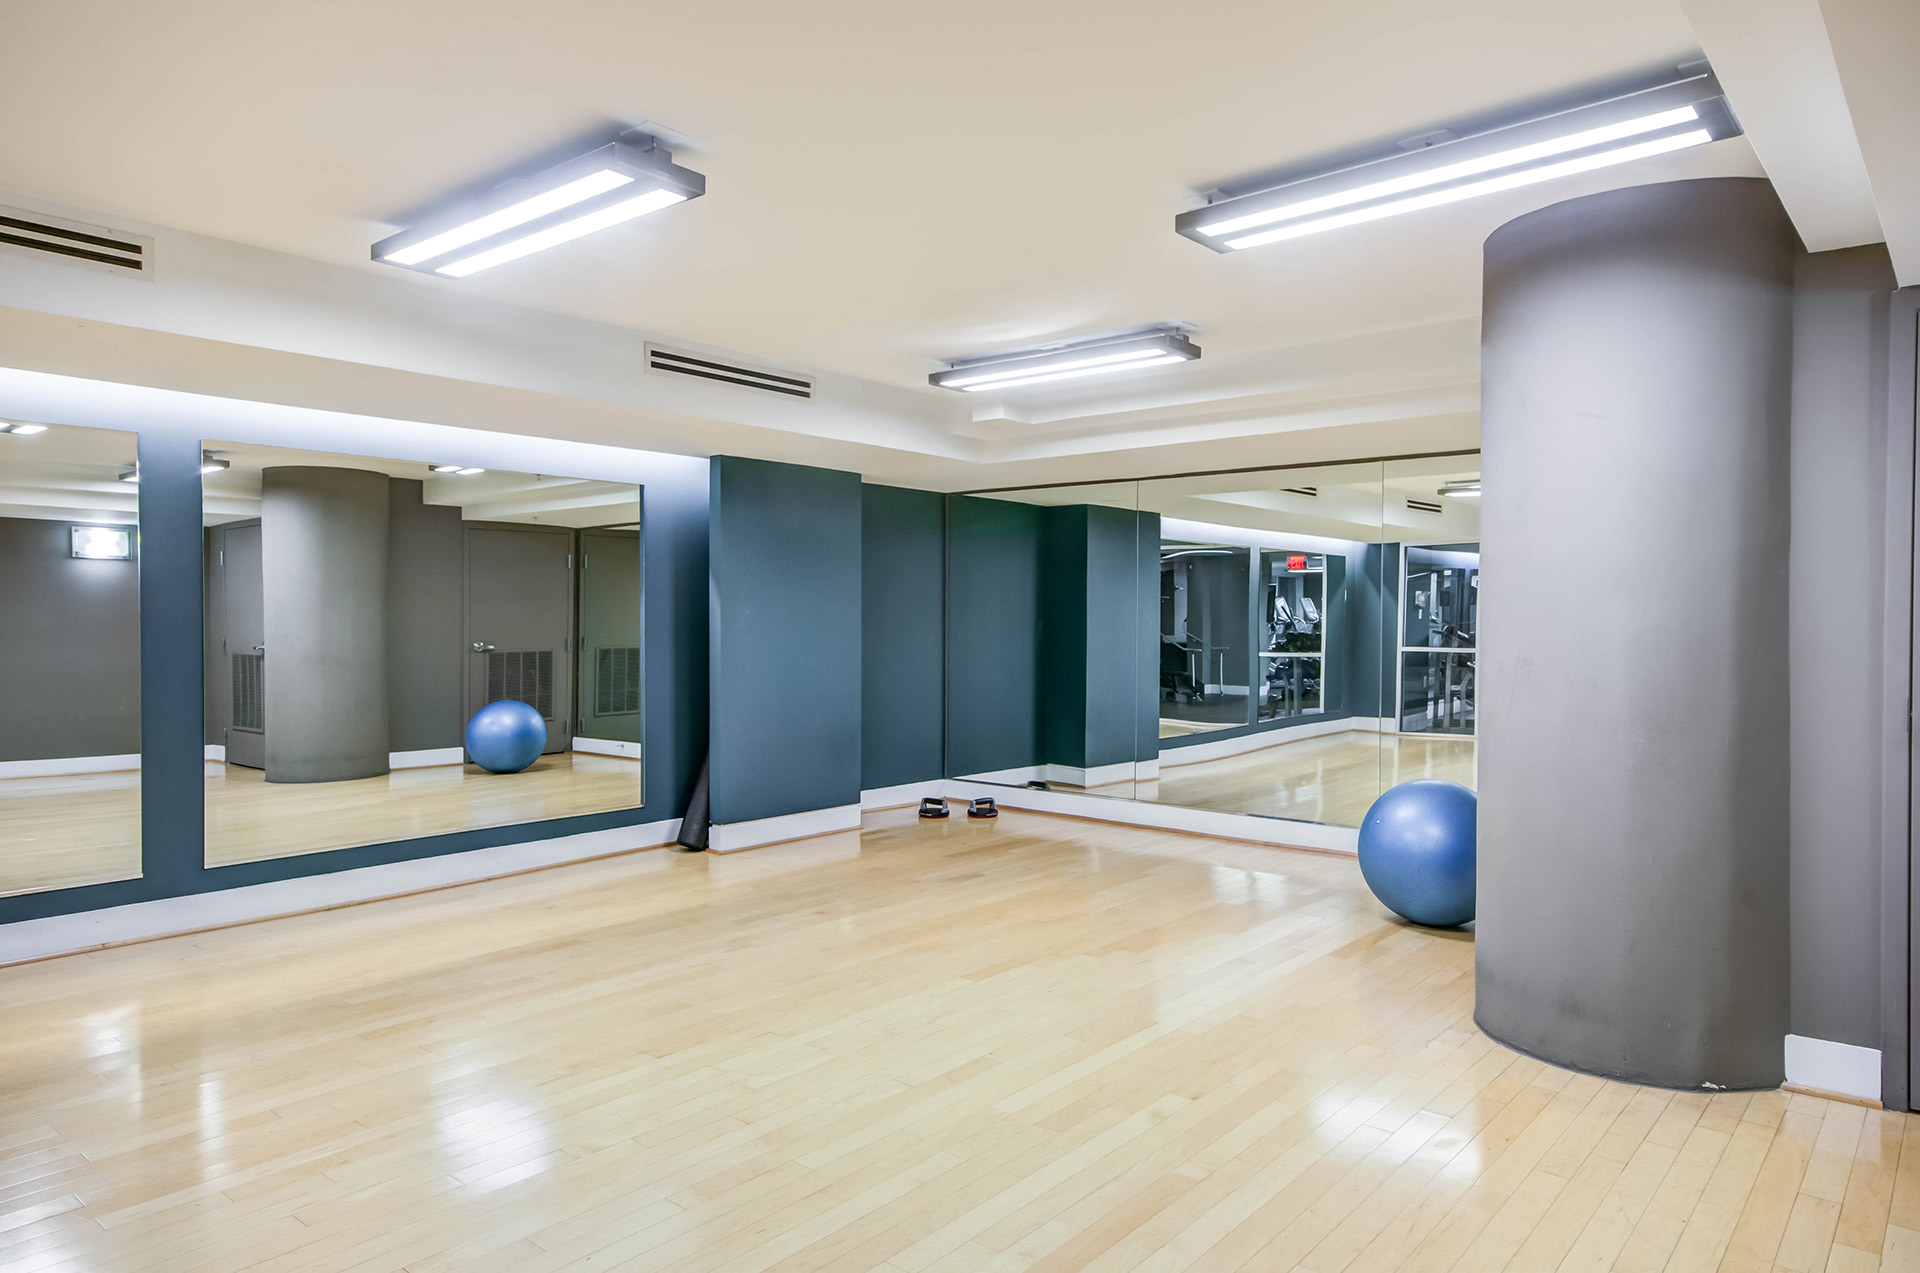 Clean and bright yoga and stretch studio with light wood flooring, mirrored walls and basic equipment stored to the right